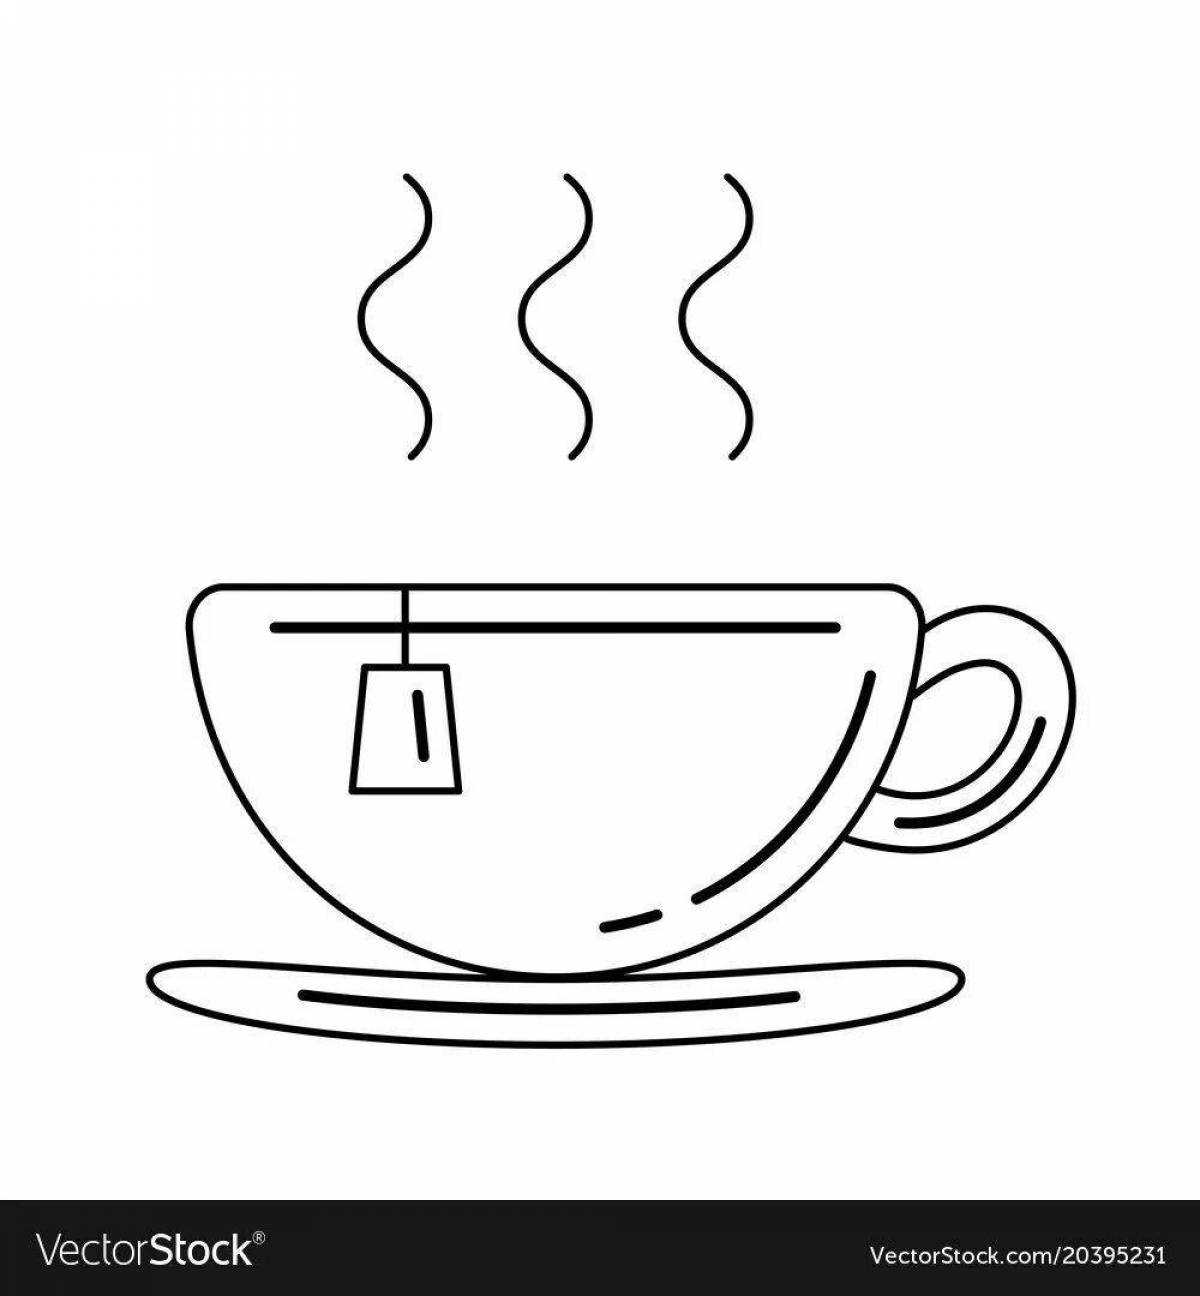 Cup of tea coloring page